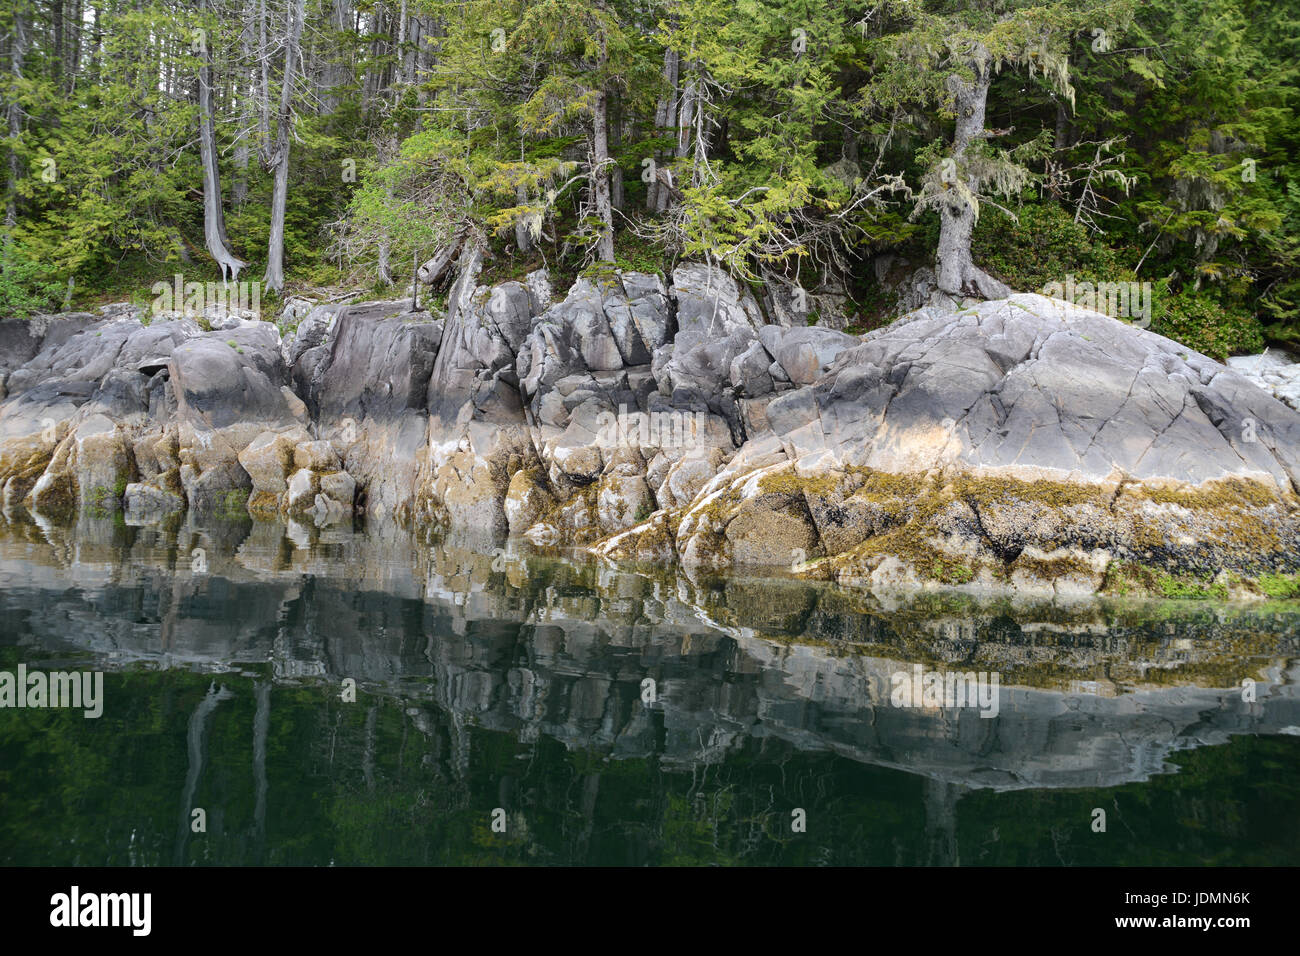 The rocky, tree-lined Pacific shores of Spiller Channel in low-tide, in the Great Bear Rainforest, on the central coast of British Columbia, Canada. Stock Photo